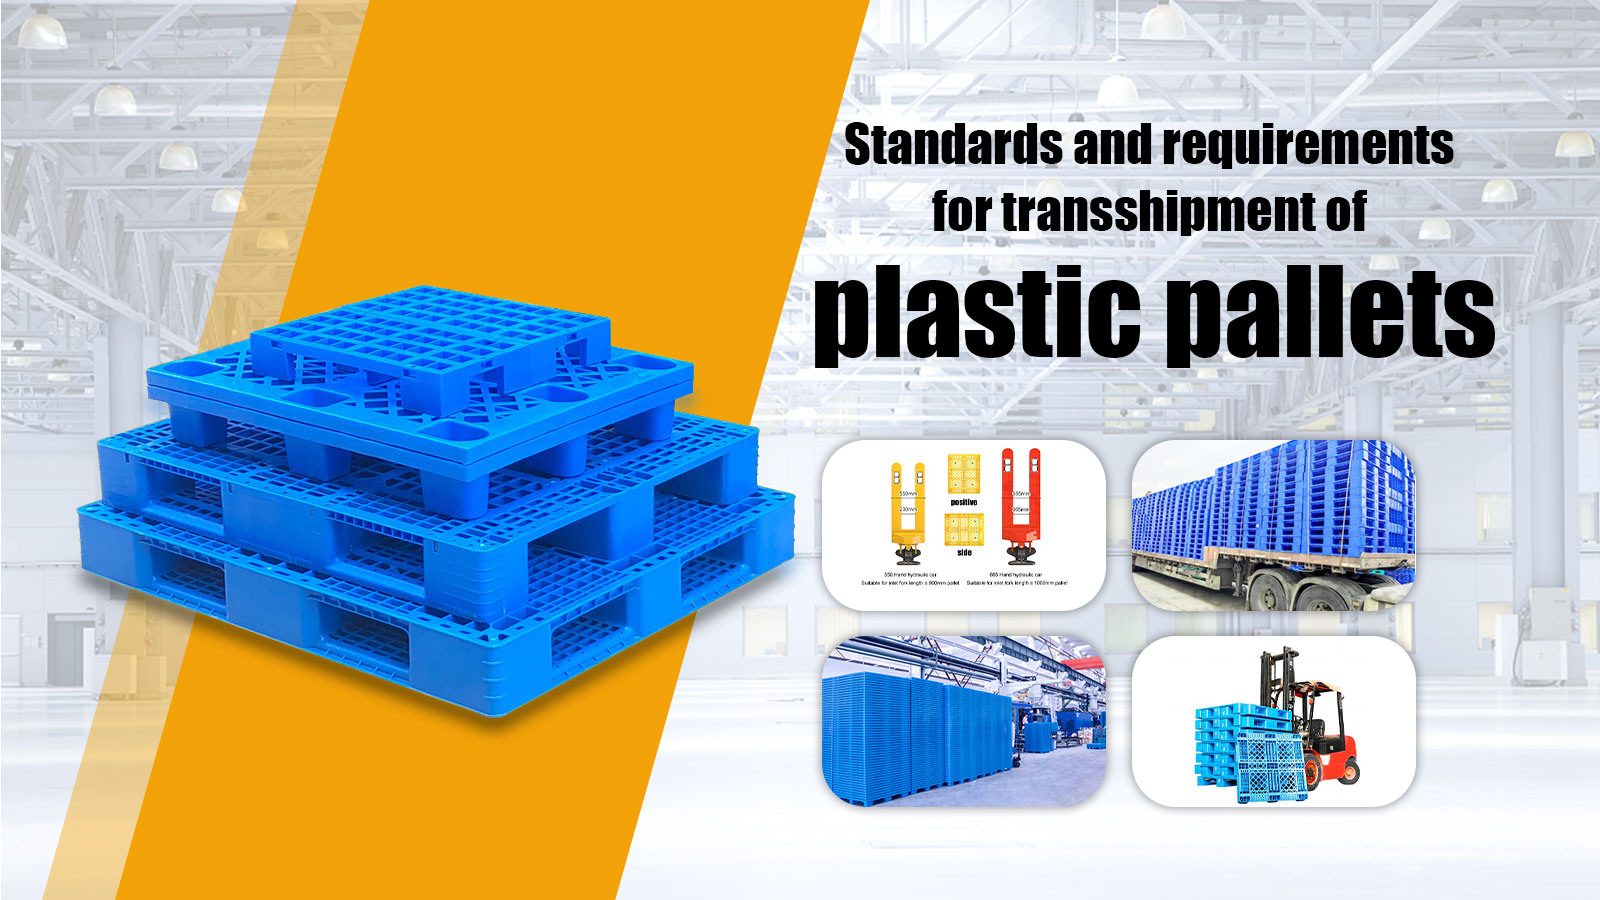 Standards and requirements for transshipment of plastic pallets